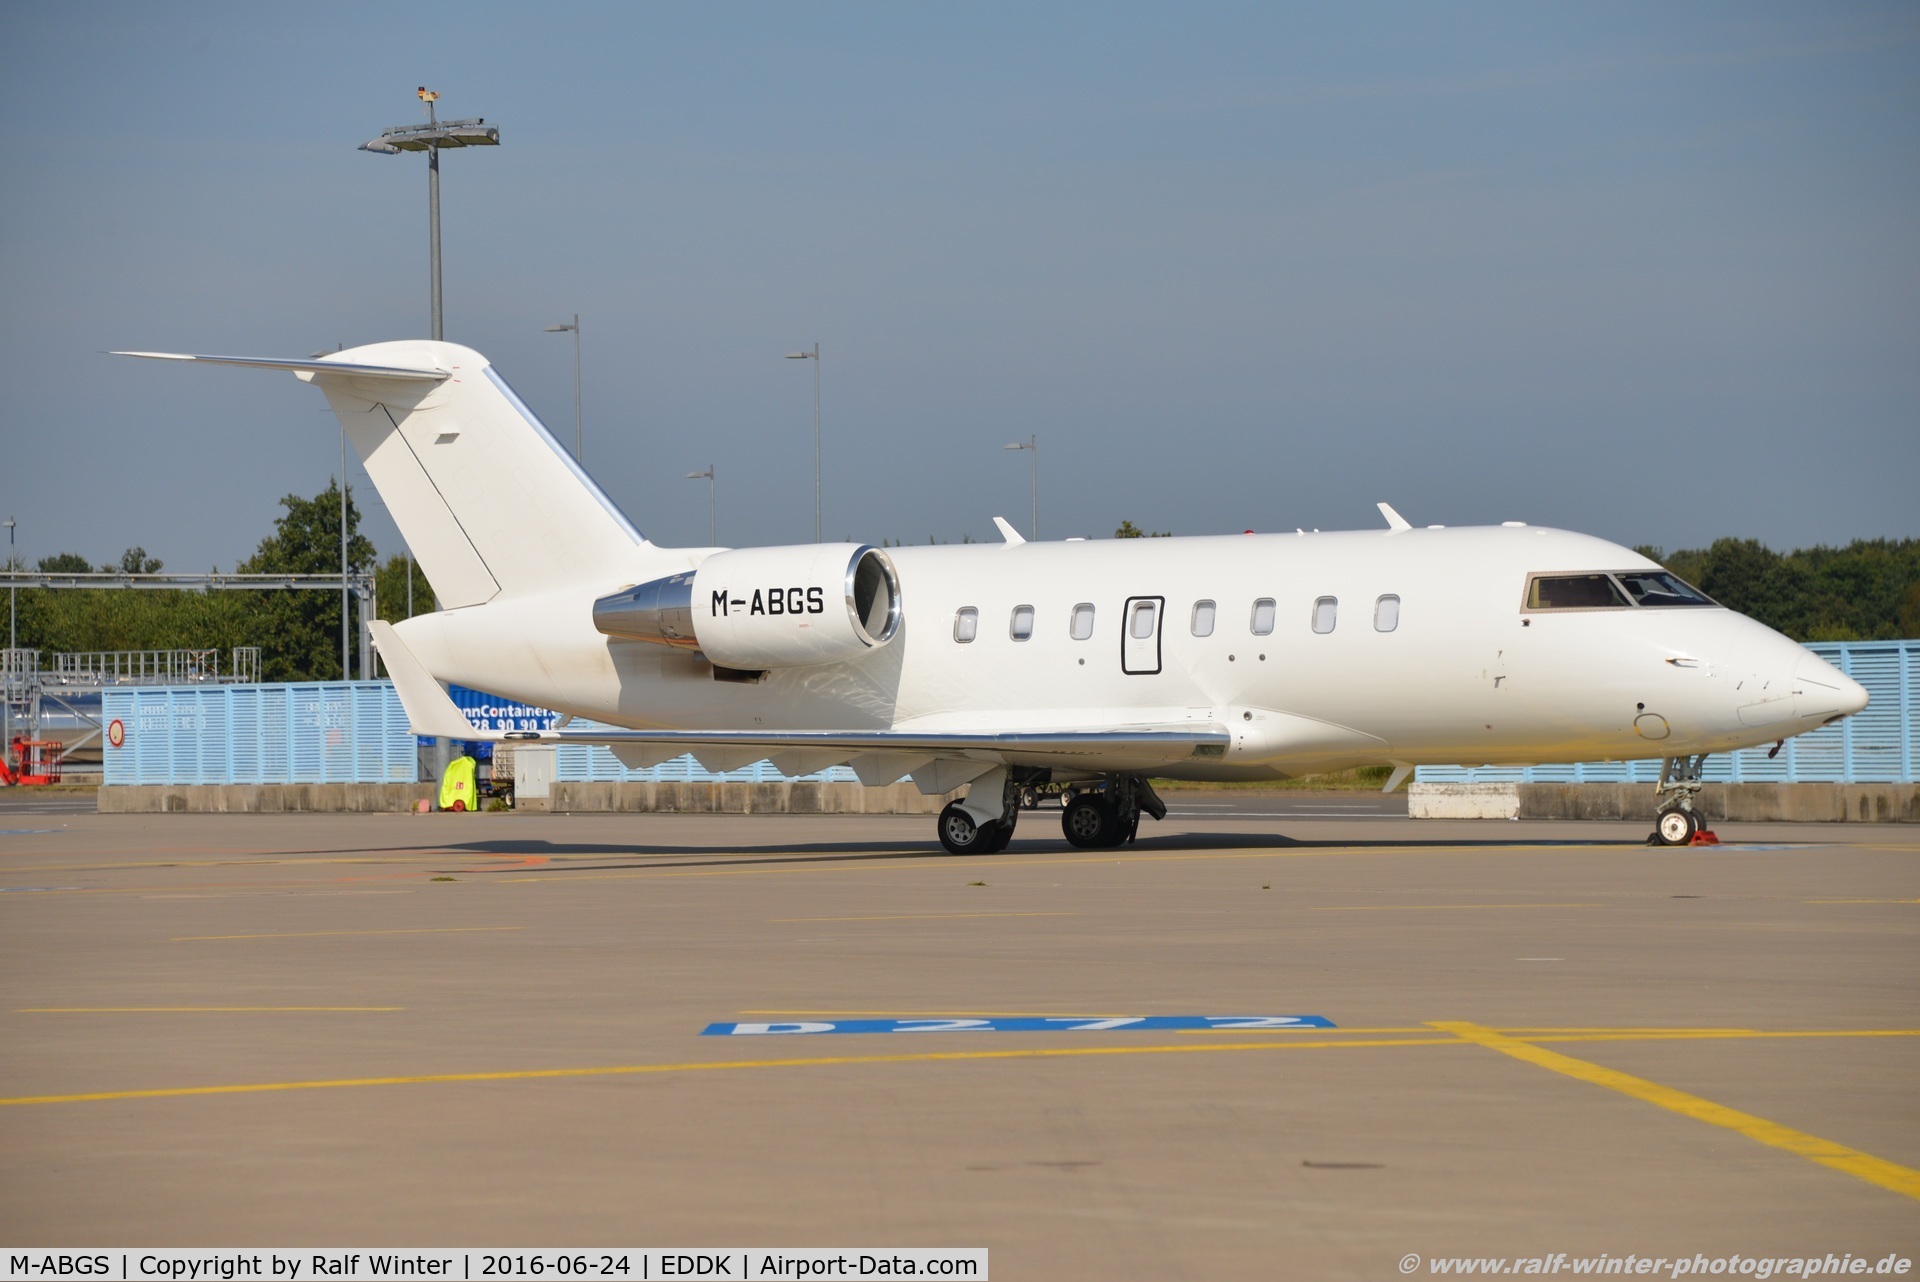 M-ABGS, 2013 Bombardier Challenger 605 (CL-600-2B16) C/N 5932, Bombardier CL-600-2B16 - Challenger 605 - Viking Travel Services - 5932 - M-ABGS - 24.09.2016 - CGN